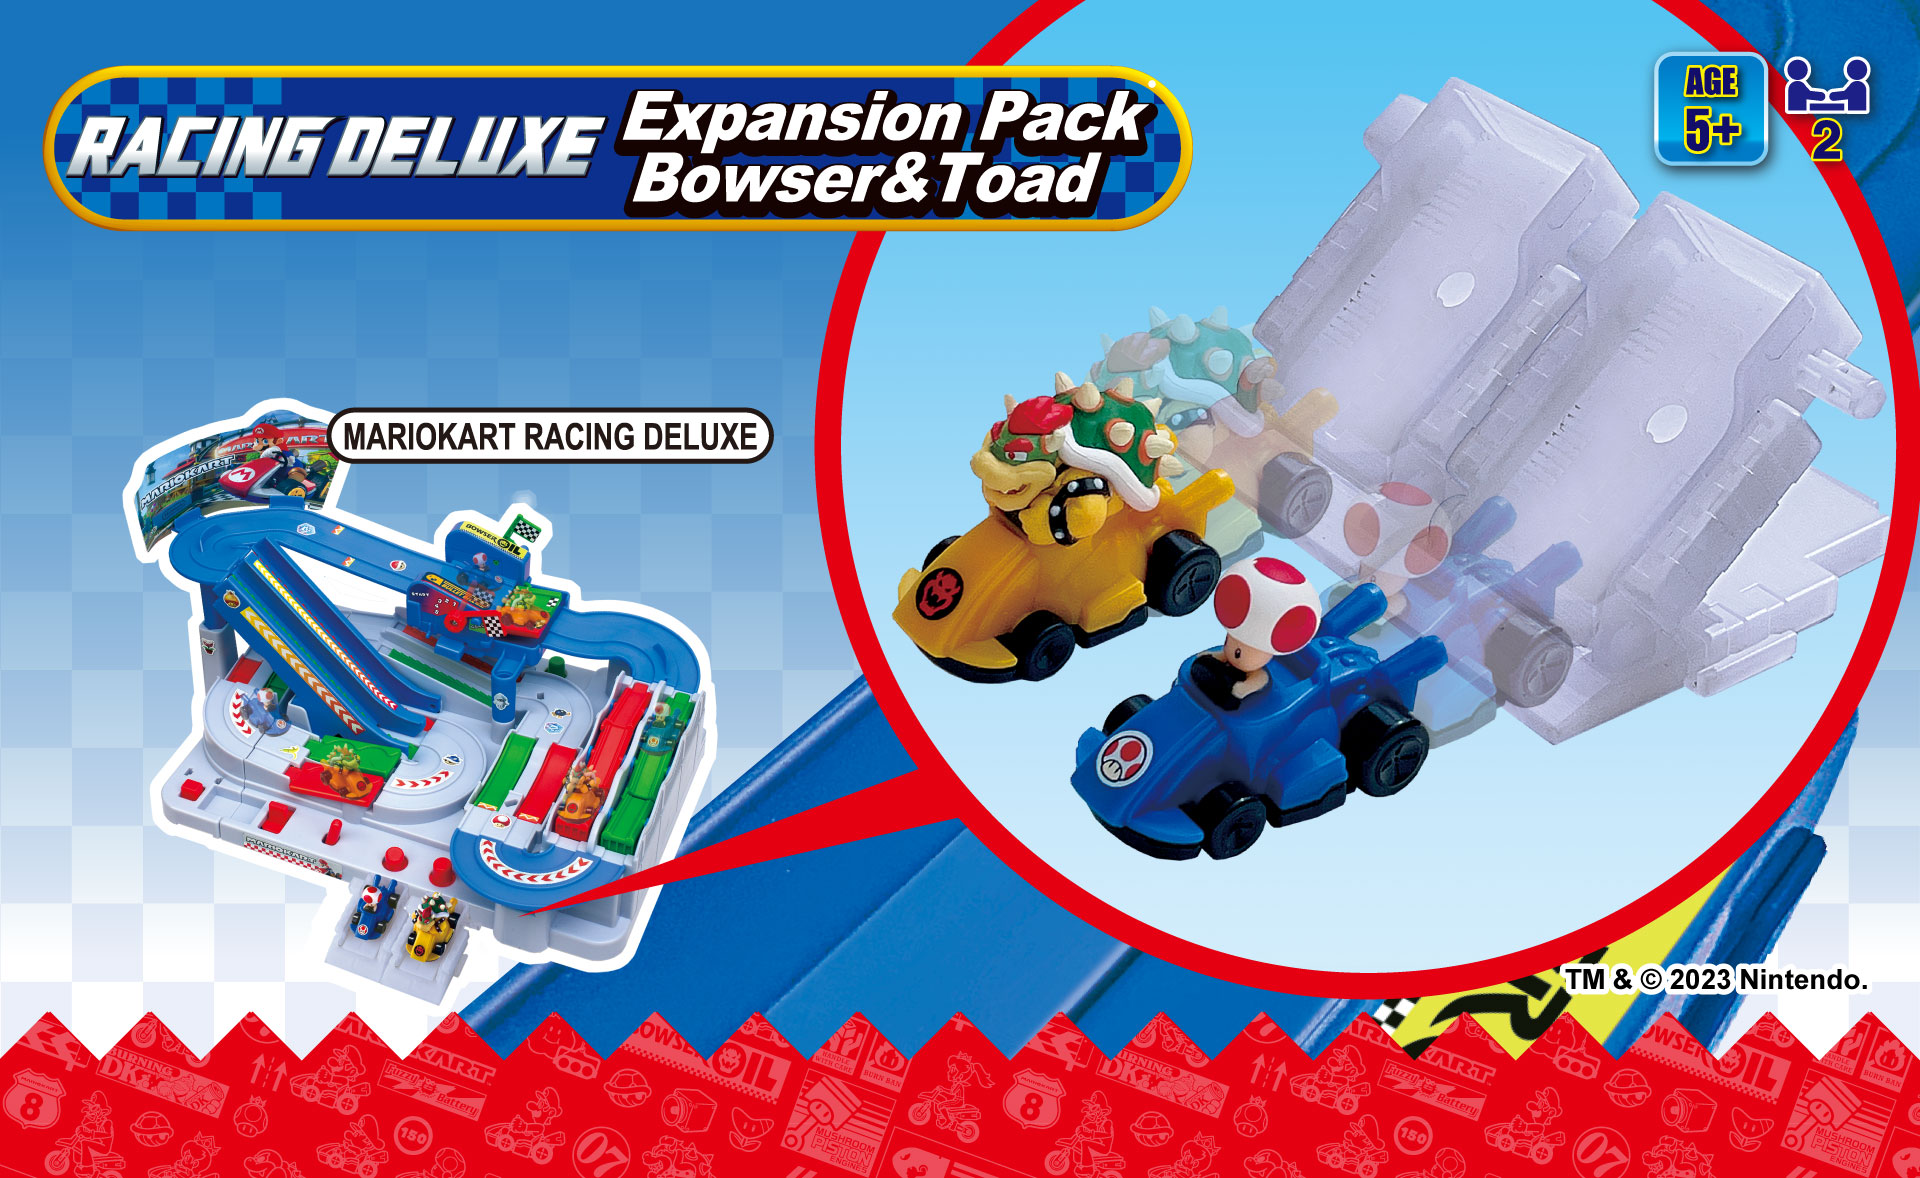 Mario Kart™ RACING DELUXE – Expansion Pack Bowser & Toad